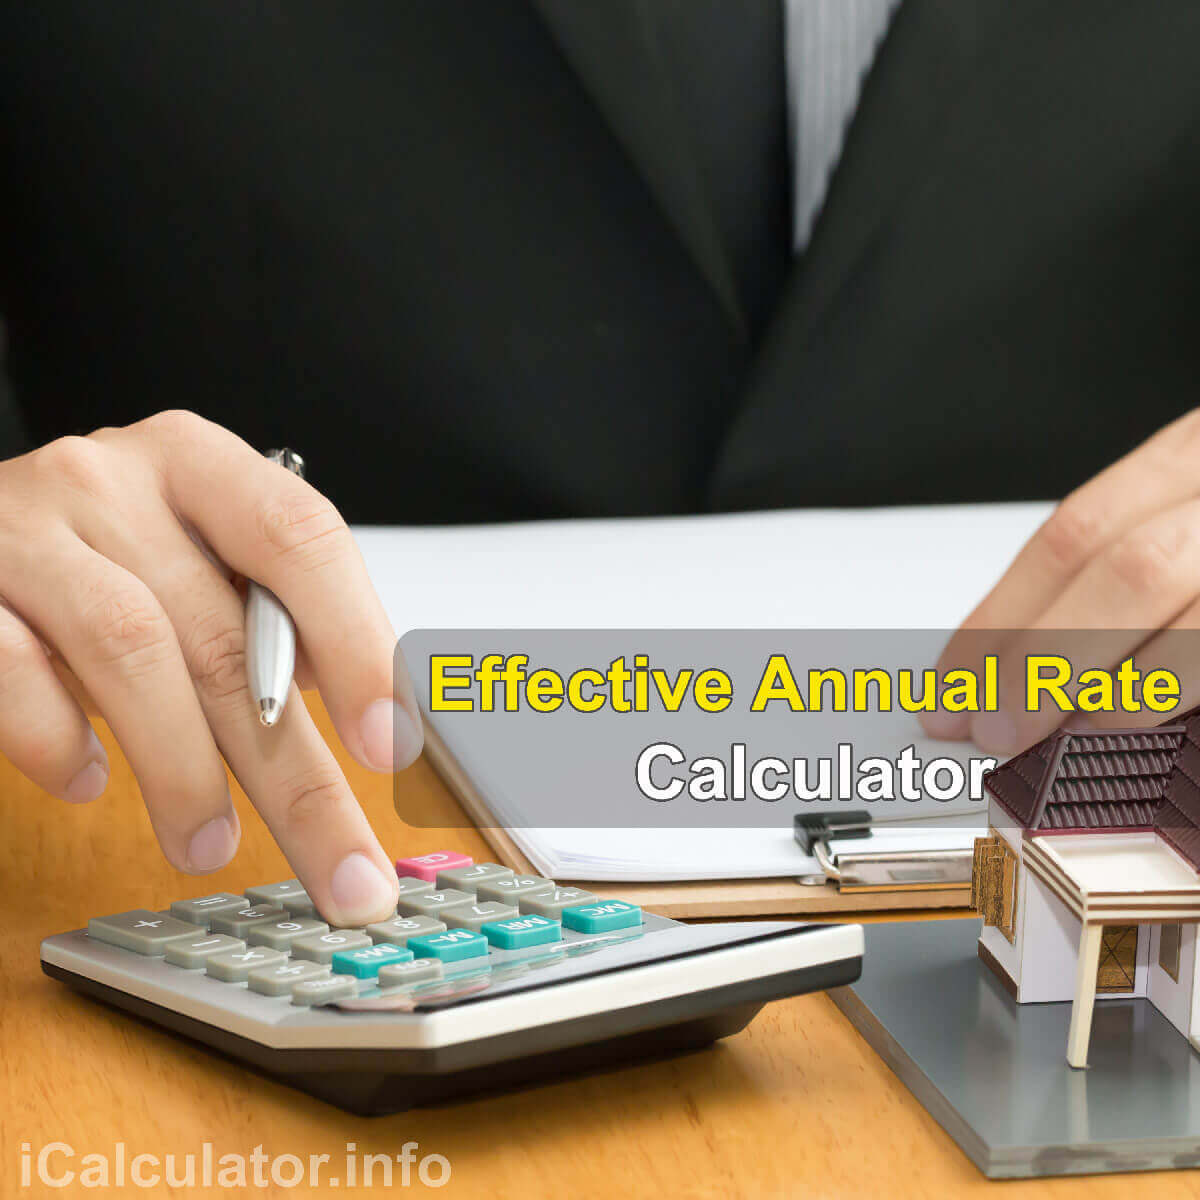 Effective Annual Rate Calculator. This image shows a man learning how to calculate the effective annual rate using a calculator and notepad. By useing the effective annual rate formula, the Effective Annual Rate Calculator provides a true calculation of the interest rate on an investment and/or personal and home loans.